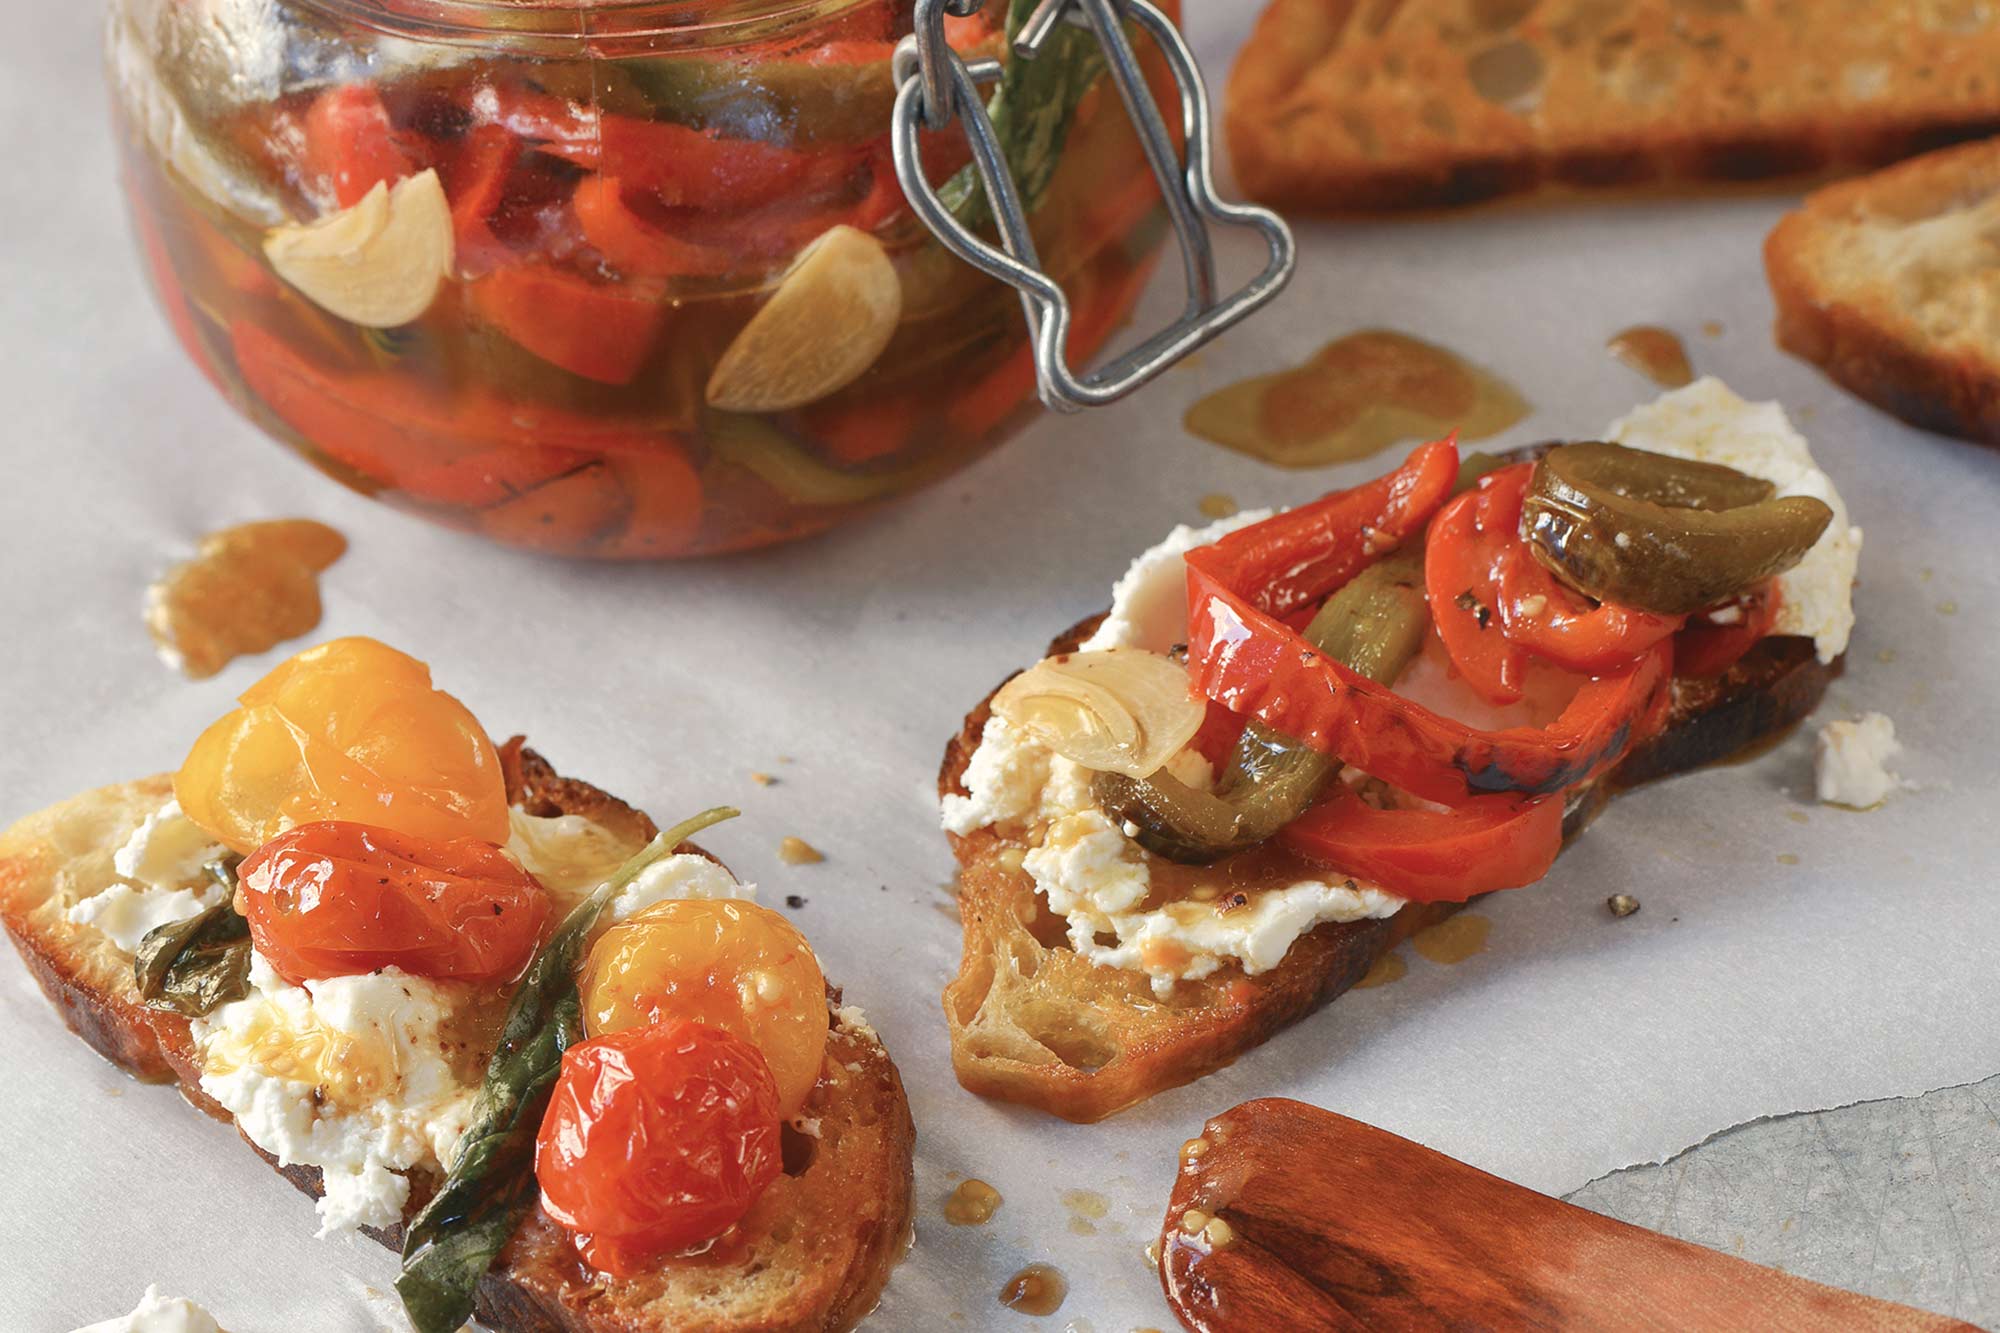 Marinated Basil and Garlic Peppers on Goat Cheese Tartines